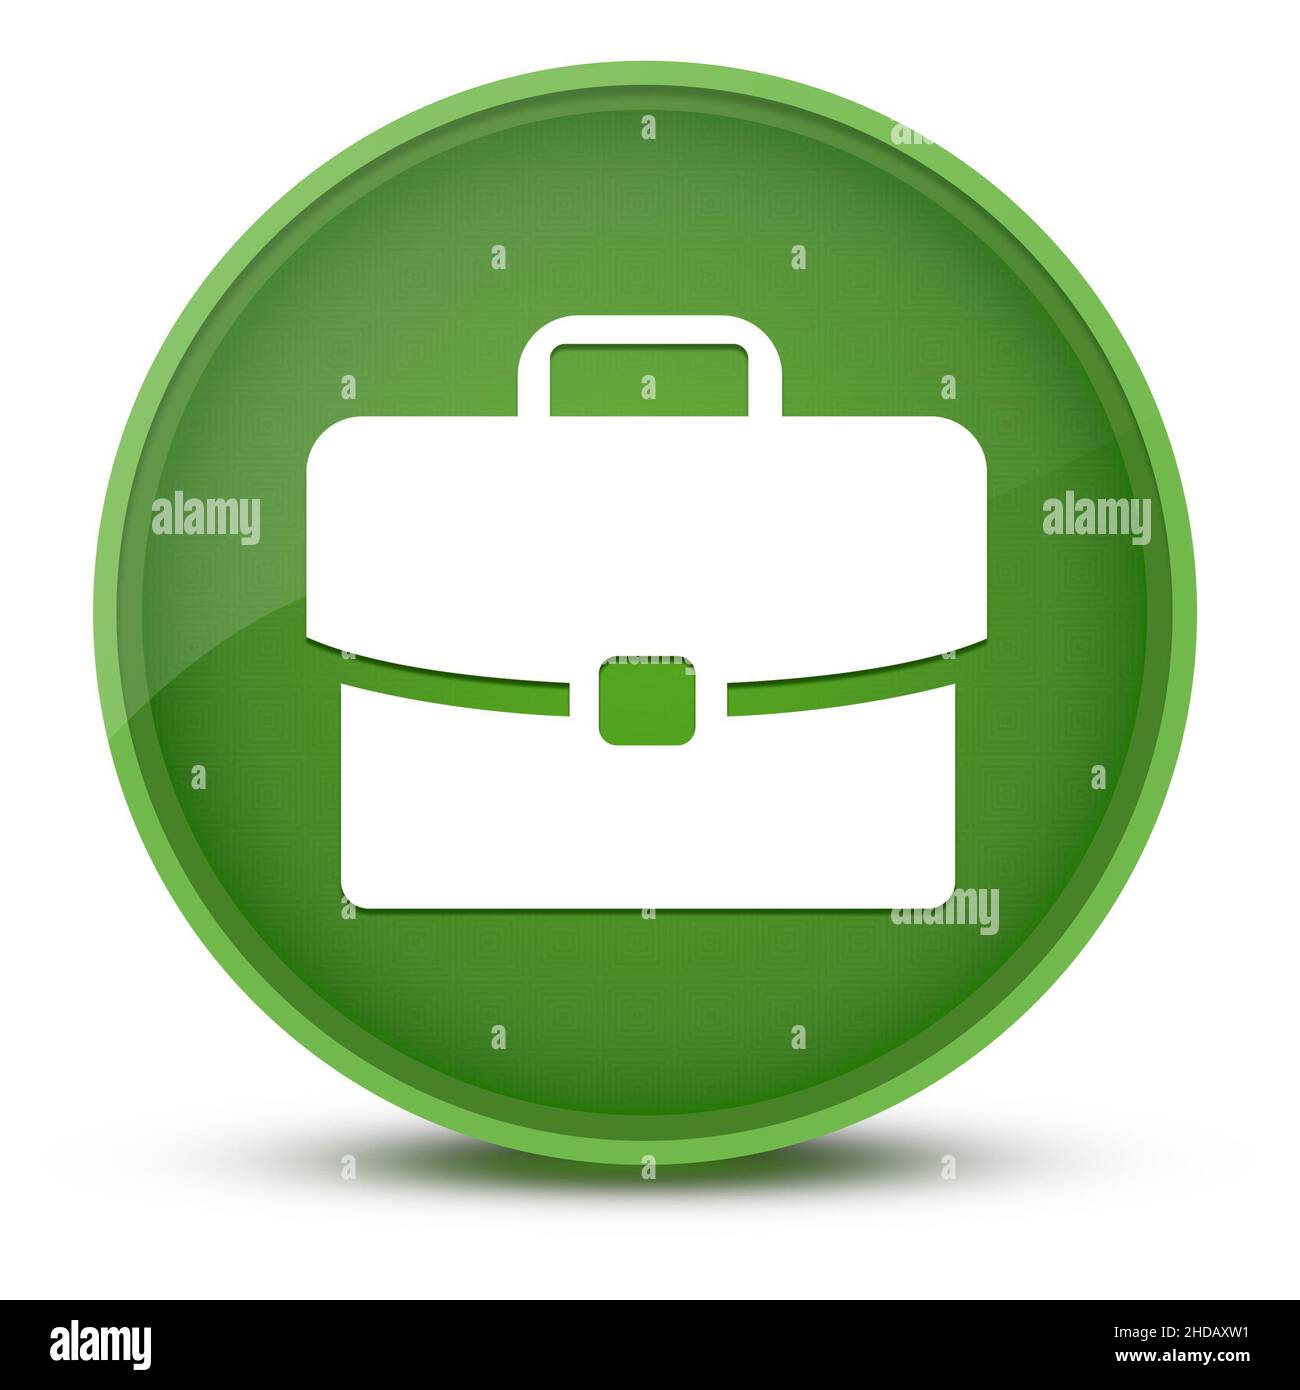 Work experience luxurious glossy green round button abstract illustration Stock Photo